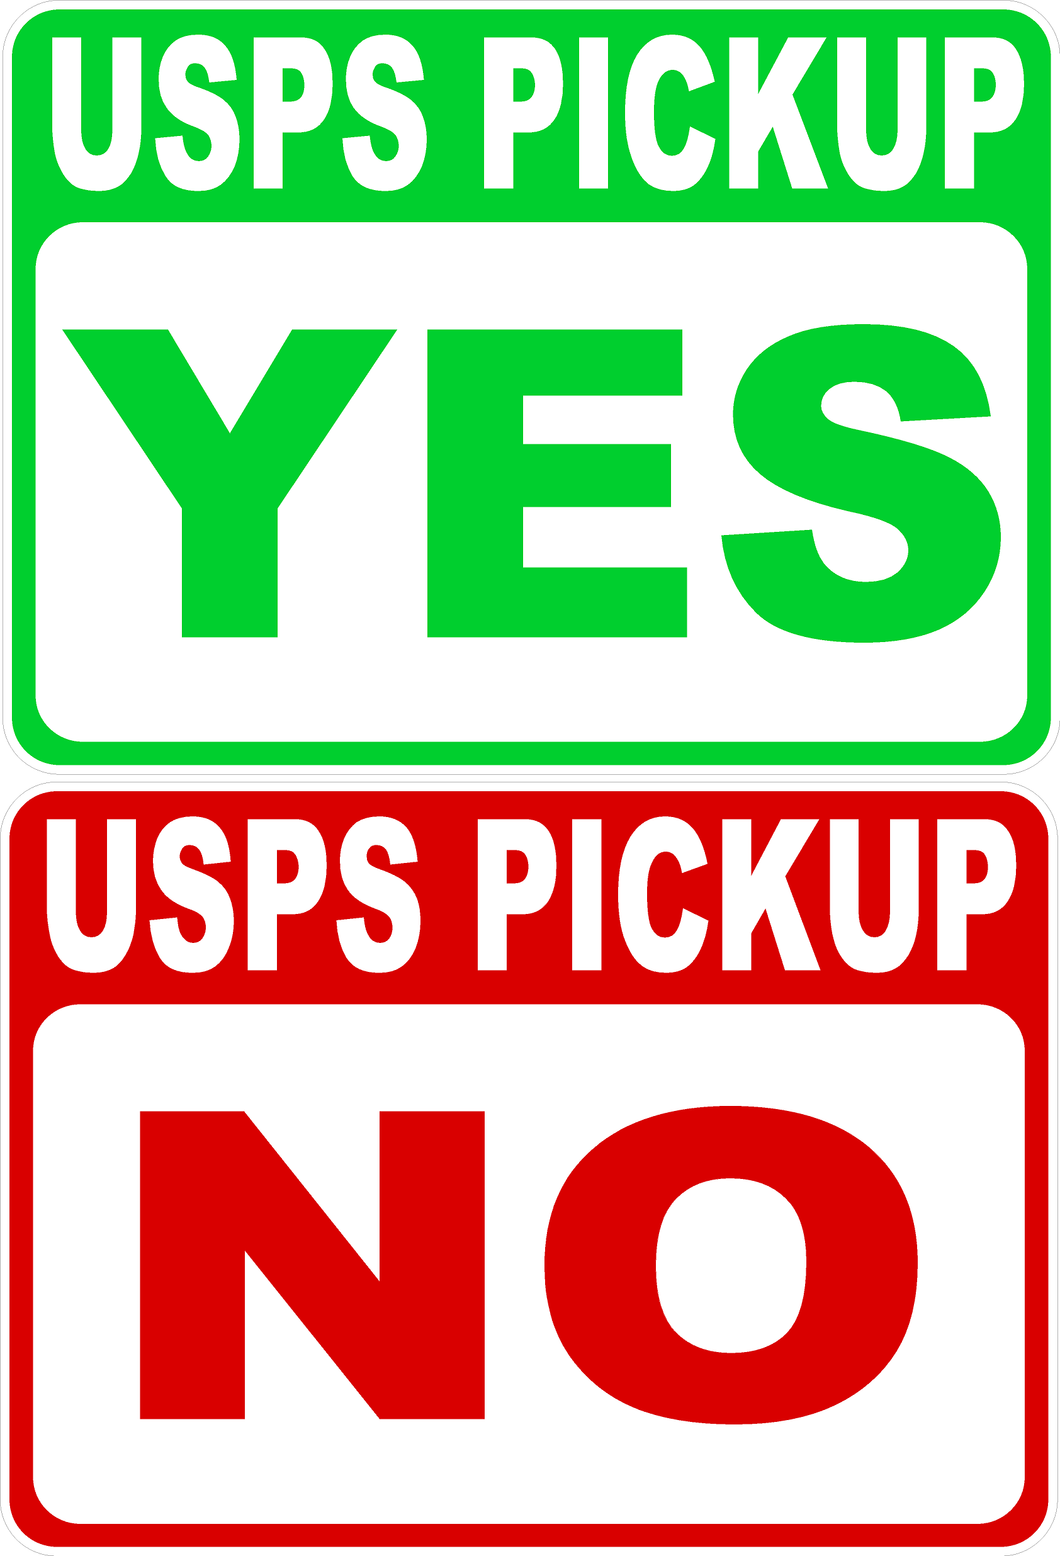 USPS Pickup No Pick-Up Yes Pick Up Magnetic Signs Two Pack (1 of each)